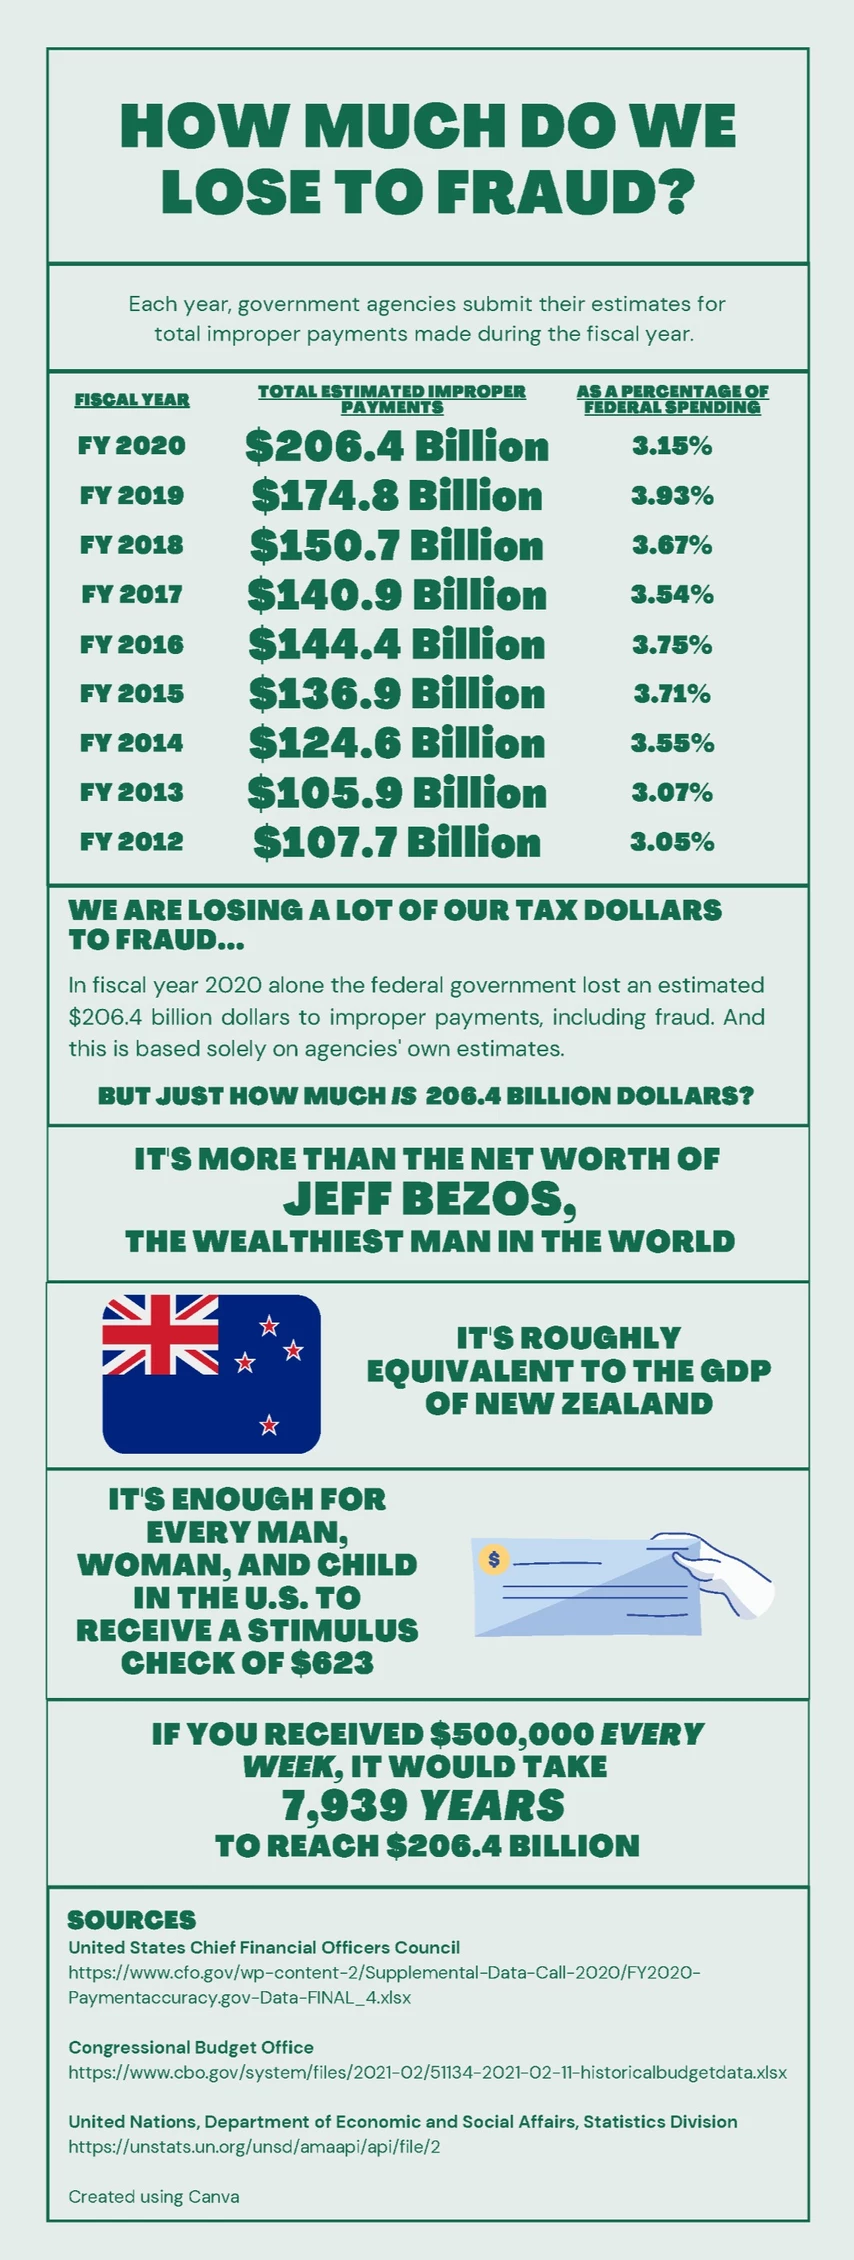 How much is $206.4 billion dollars actually worth? It's the amount of money the federal government lost to fraud in one year.

It's more than the net worth of Jeff Bezos.

The GDP of New Zealand

Enough for every American citizen to receive a stimulus check of $623.